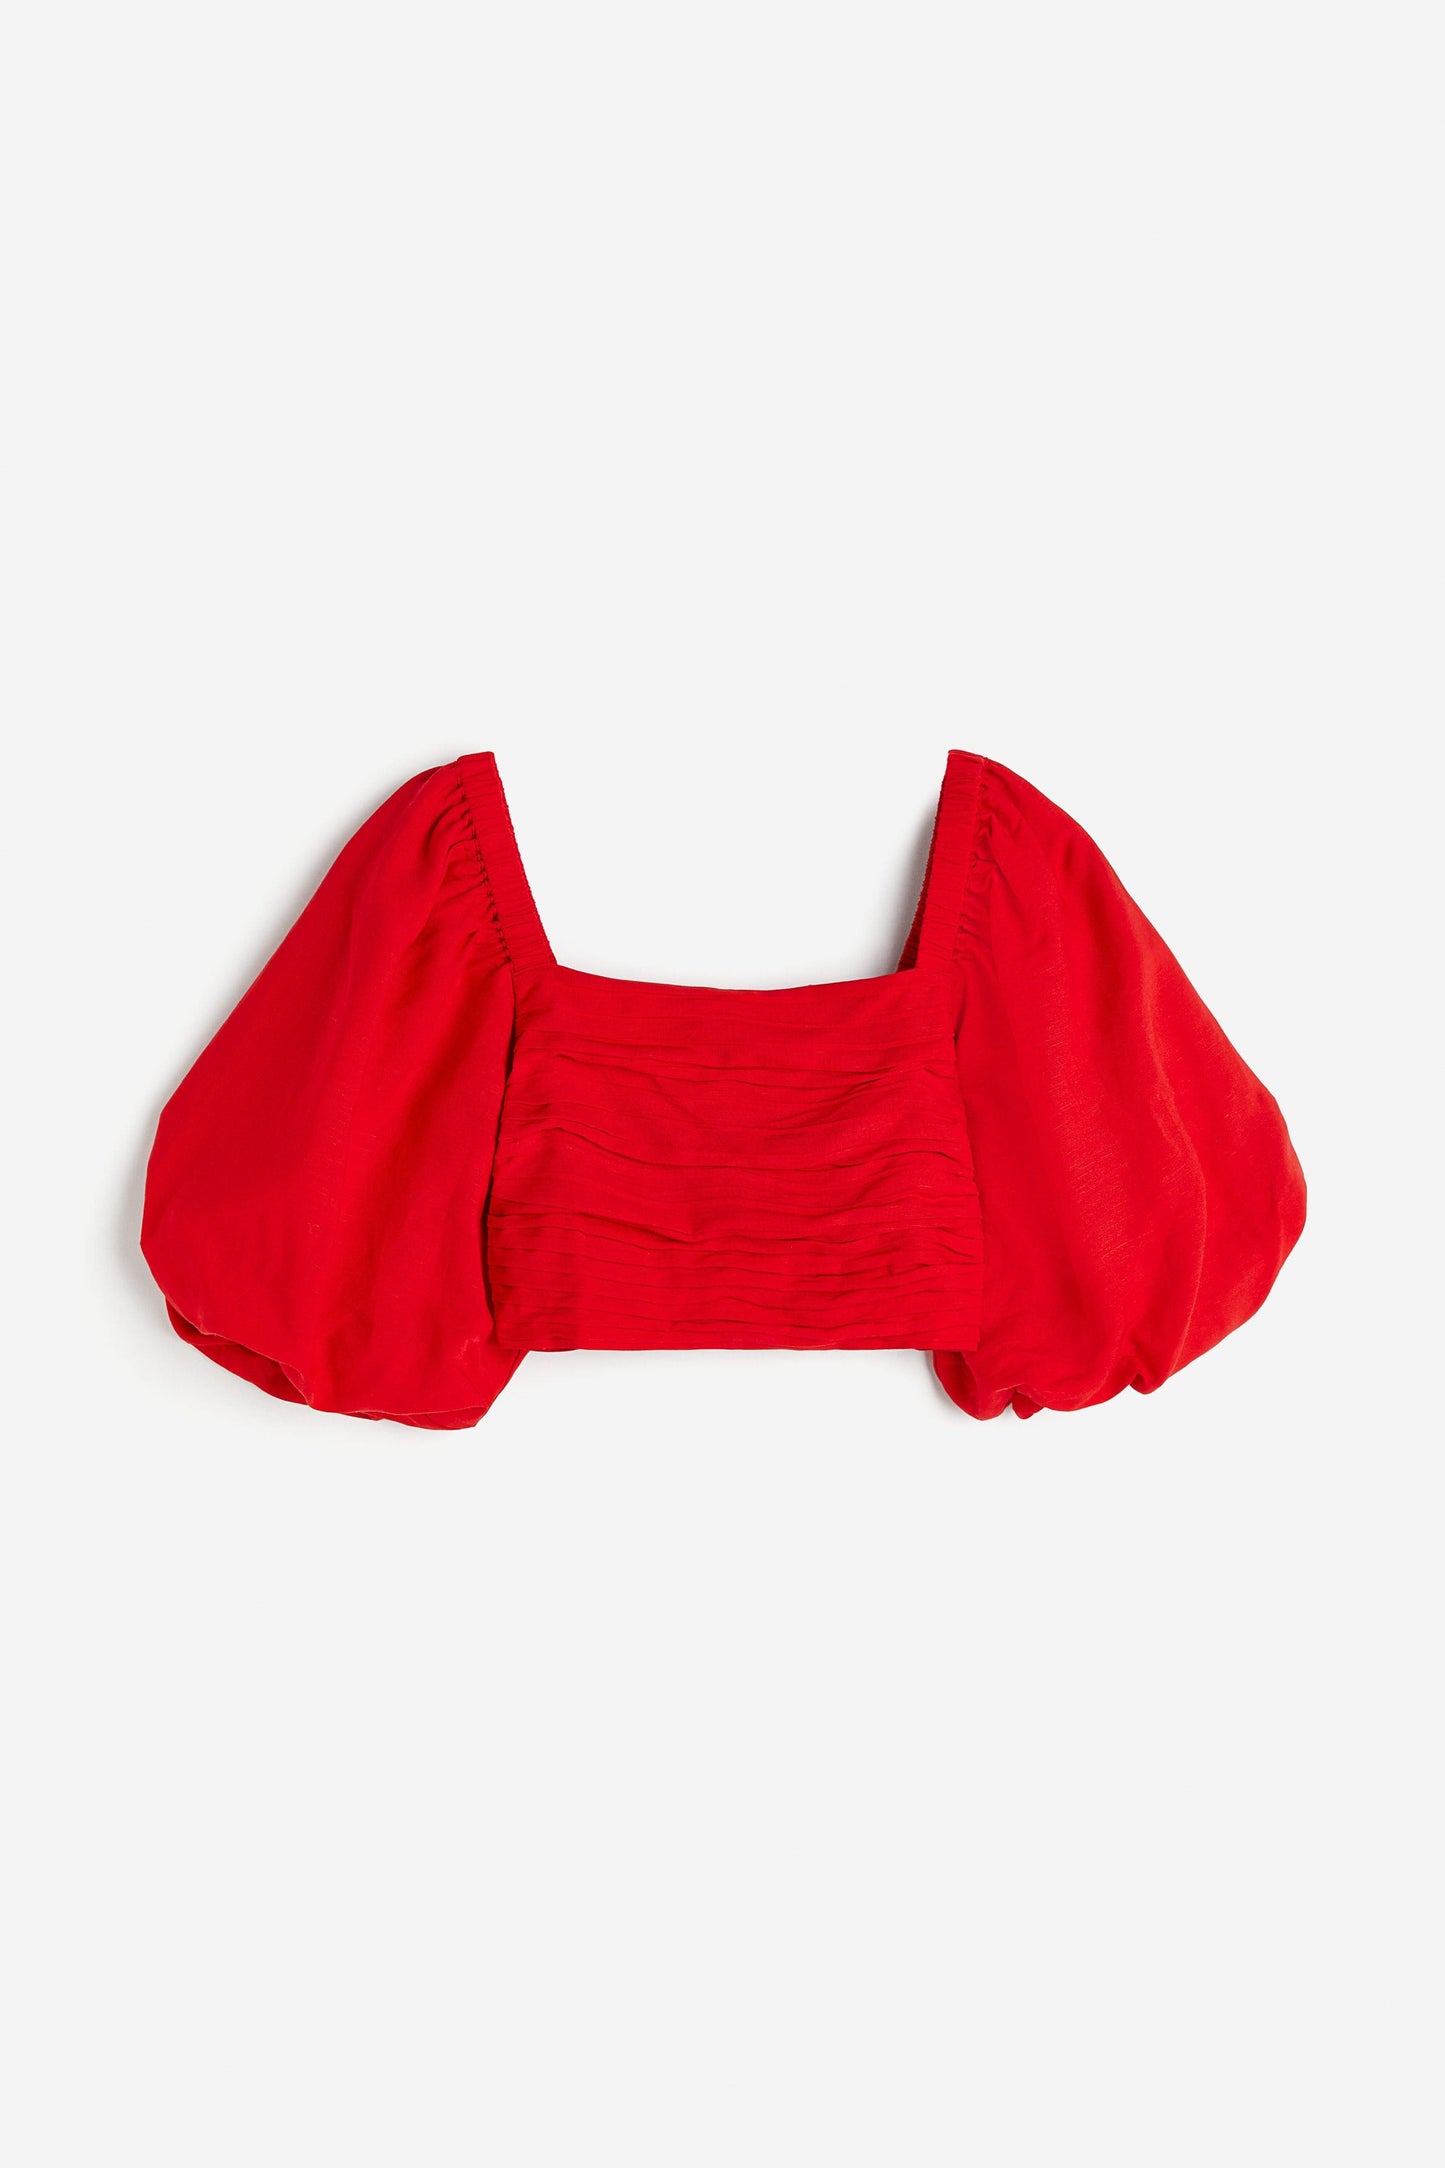 CROP GATHERED BODICE RED TOP,balloon sleeves, blouse, casual, crop, pleated, rayon, red, regular fit, soft girl, solid, square neck, summer, three quarter sleeves, tops, topwear, vacation, woven,crop-gathered-bodice-red-top,Neck - Square neckSleeve - Puff sleevesFit - Slim fitPrint/Pattern - SolidColor - RedMaterial - Rayon Detail - Gathered bodice
Contains only Top